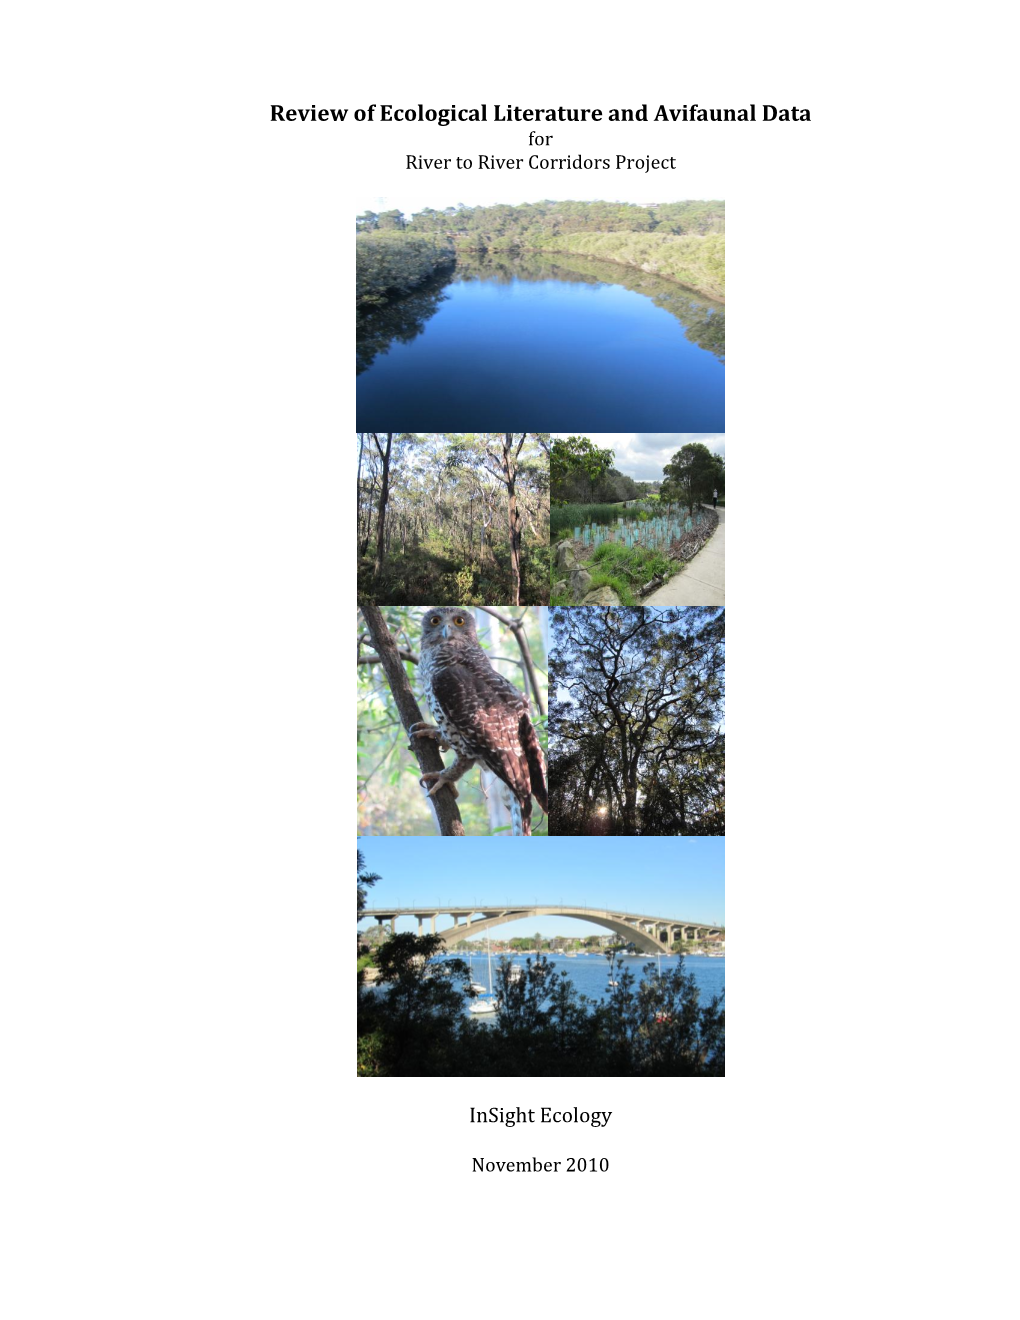 Review of Ecological Literature and Avifaunal Data for River to River Corridors Project